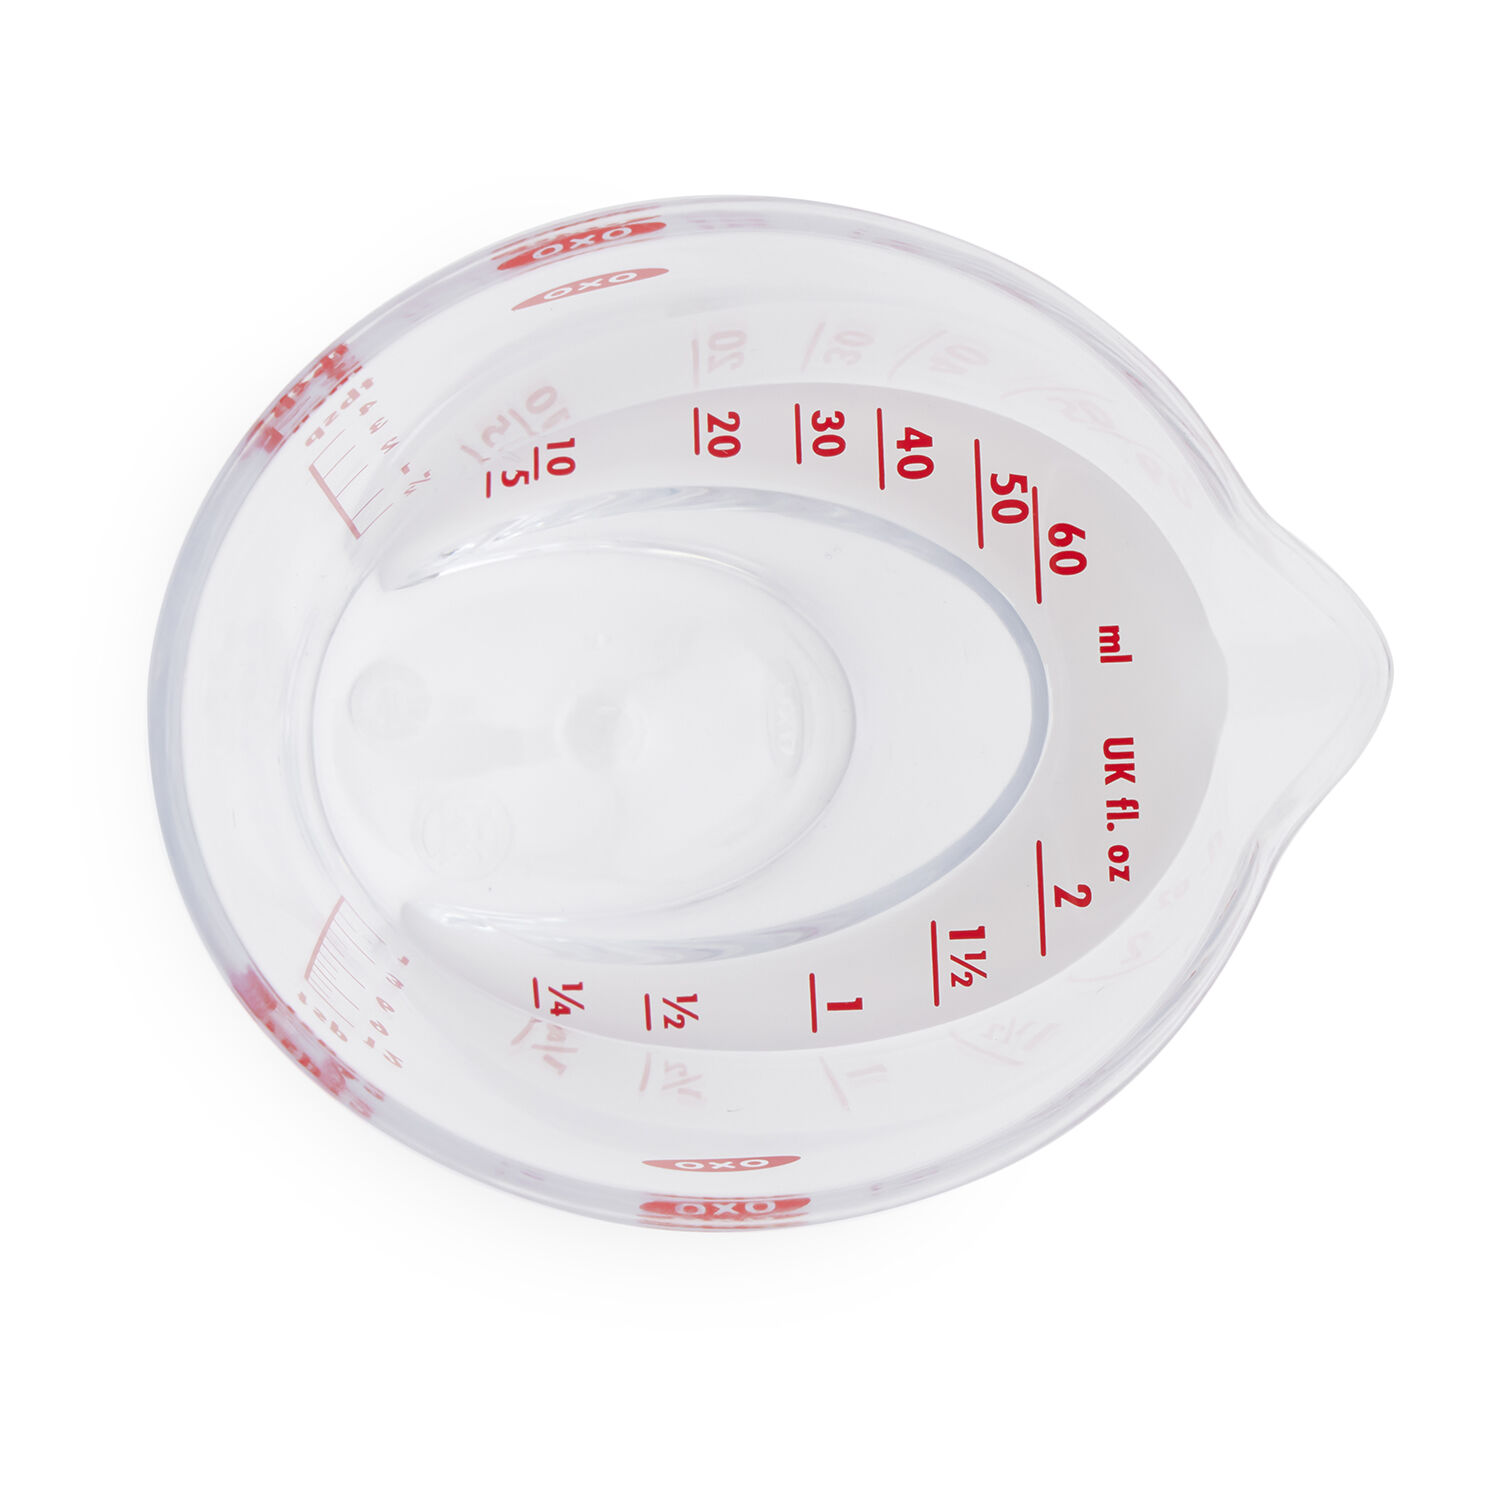 https://www.homestoreandmore.ie/dw/image/v2/BCBN_PRD/on/demandware.static/-/Sites-master/default/dw89e03a25/images/Oxo-Good-Grips-Mini-Angled-Measuring-Cup-mixing-measuring-032275-hi-res-2.jpg?sw=1500